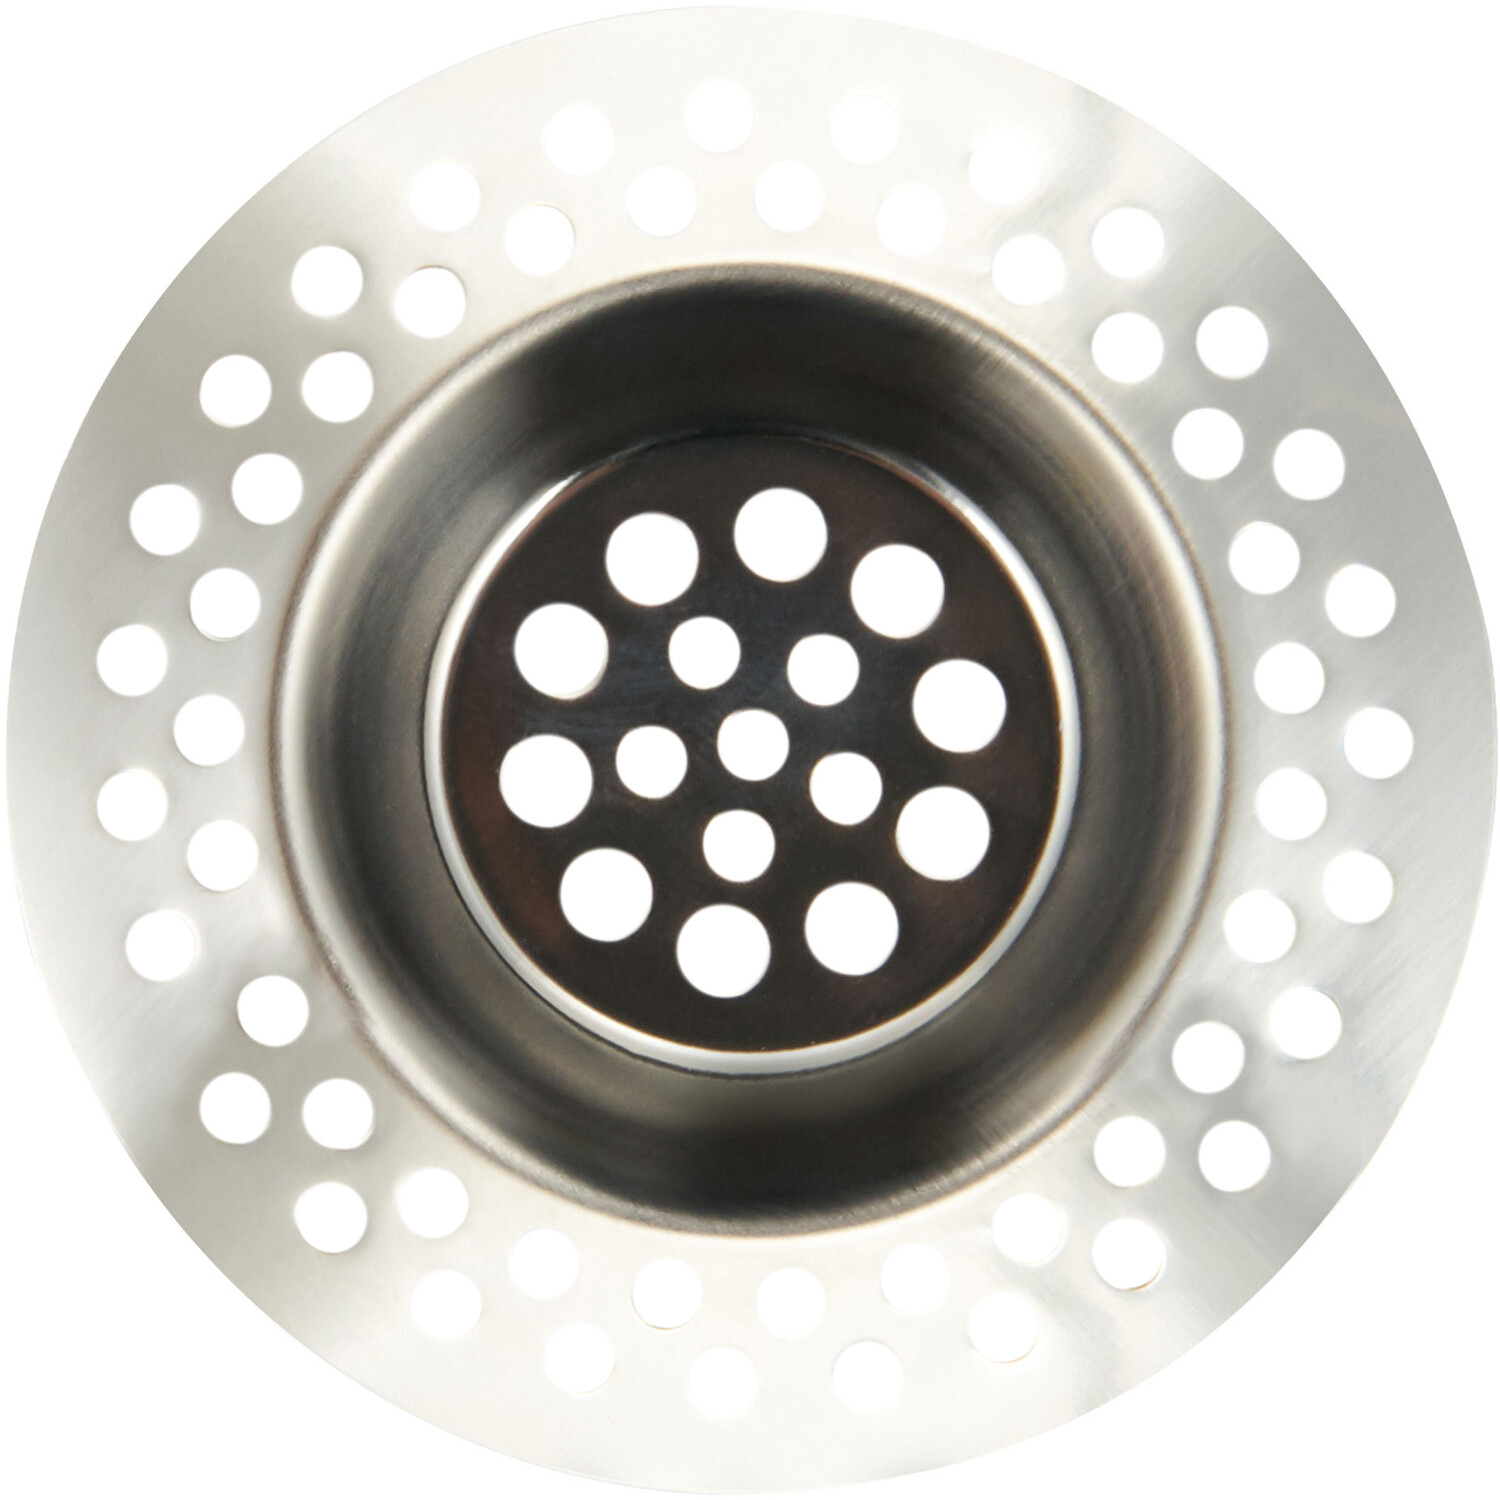 My Home Silver Sink Strainer Image 3